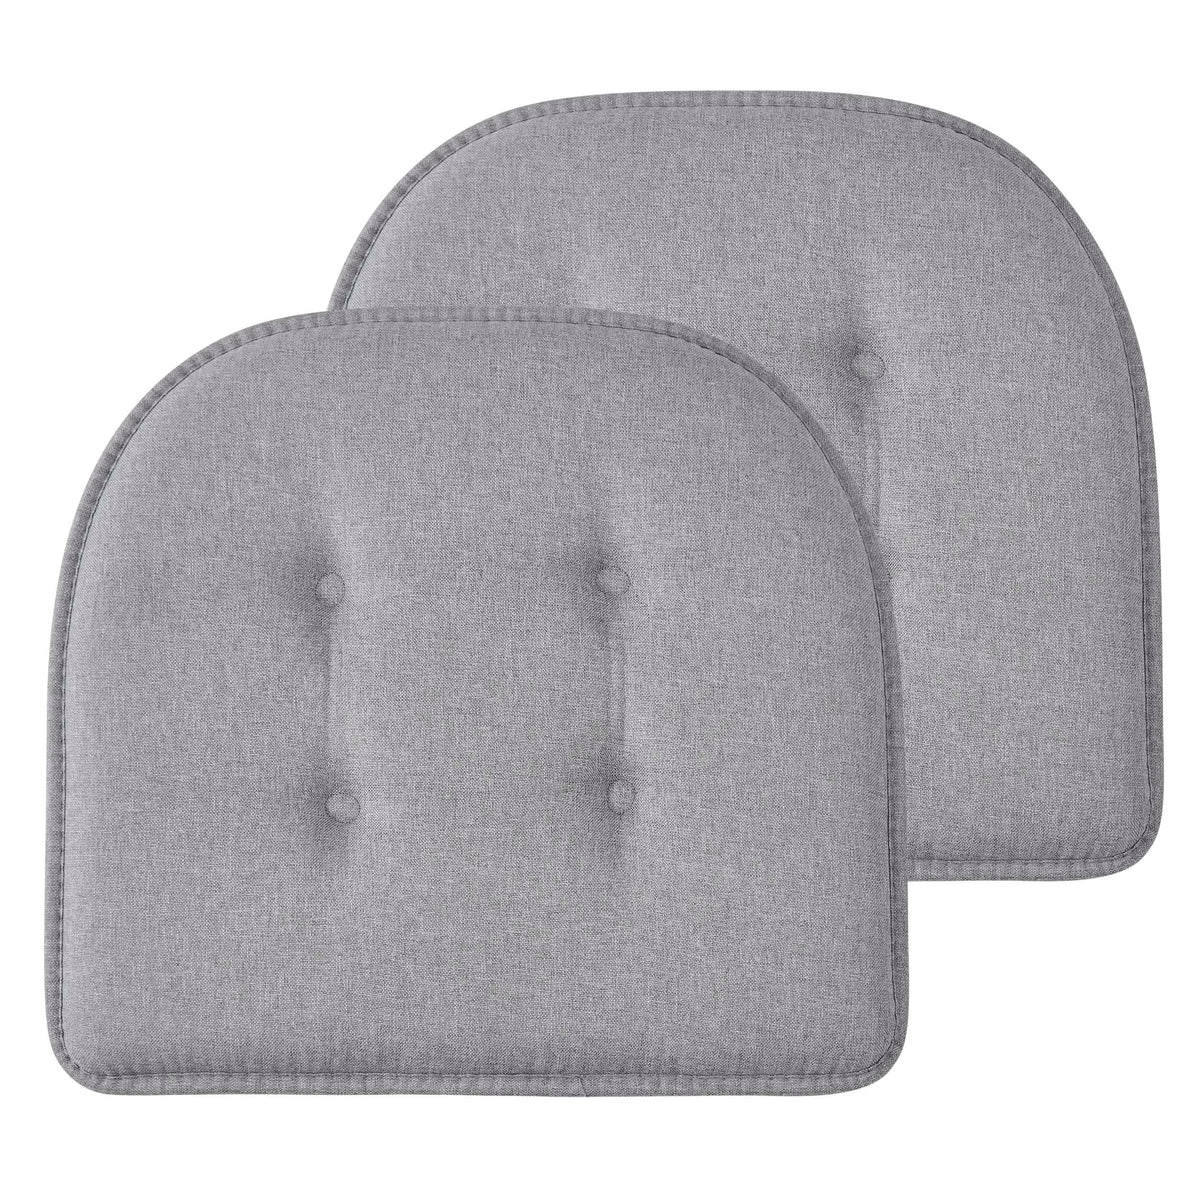 Premium Thick Comfortable Cushion U-Shaped Memory Foam Chair Pads Tufted Nonslip Rubber Back Seat 17 x 16 Inch Indoor Seat Cover